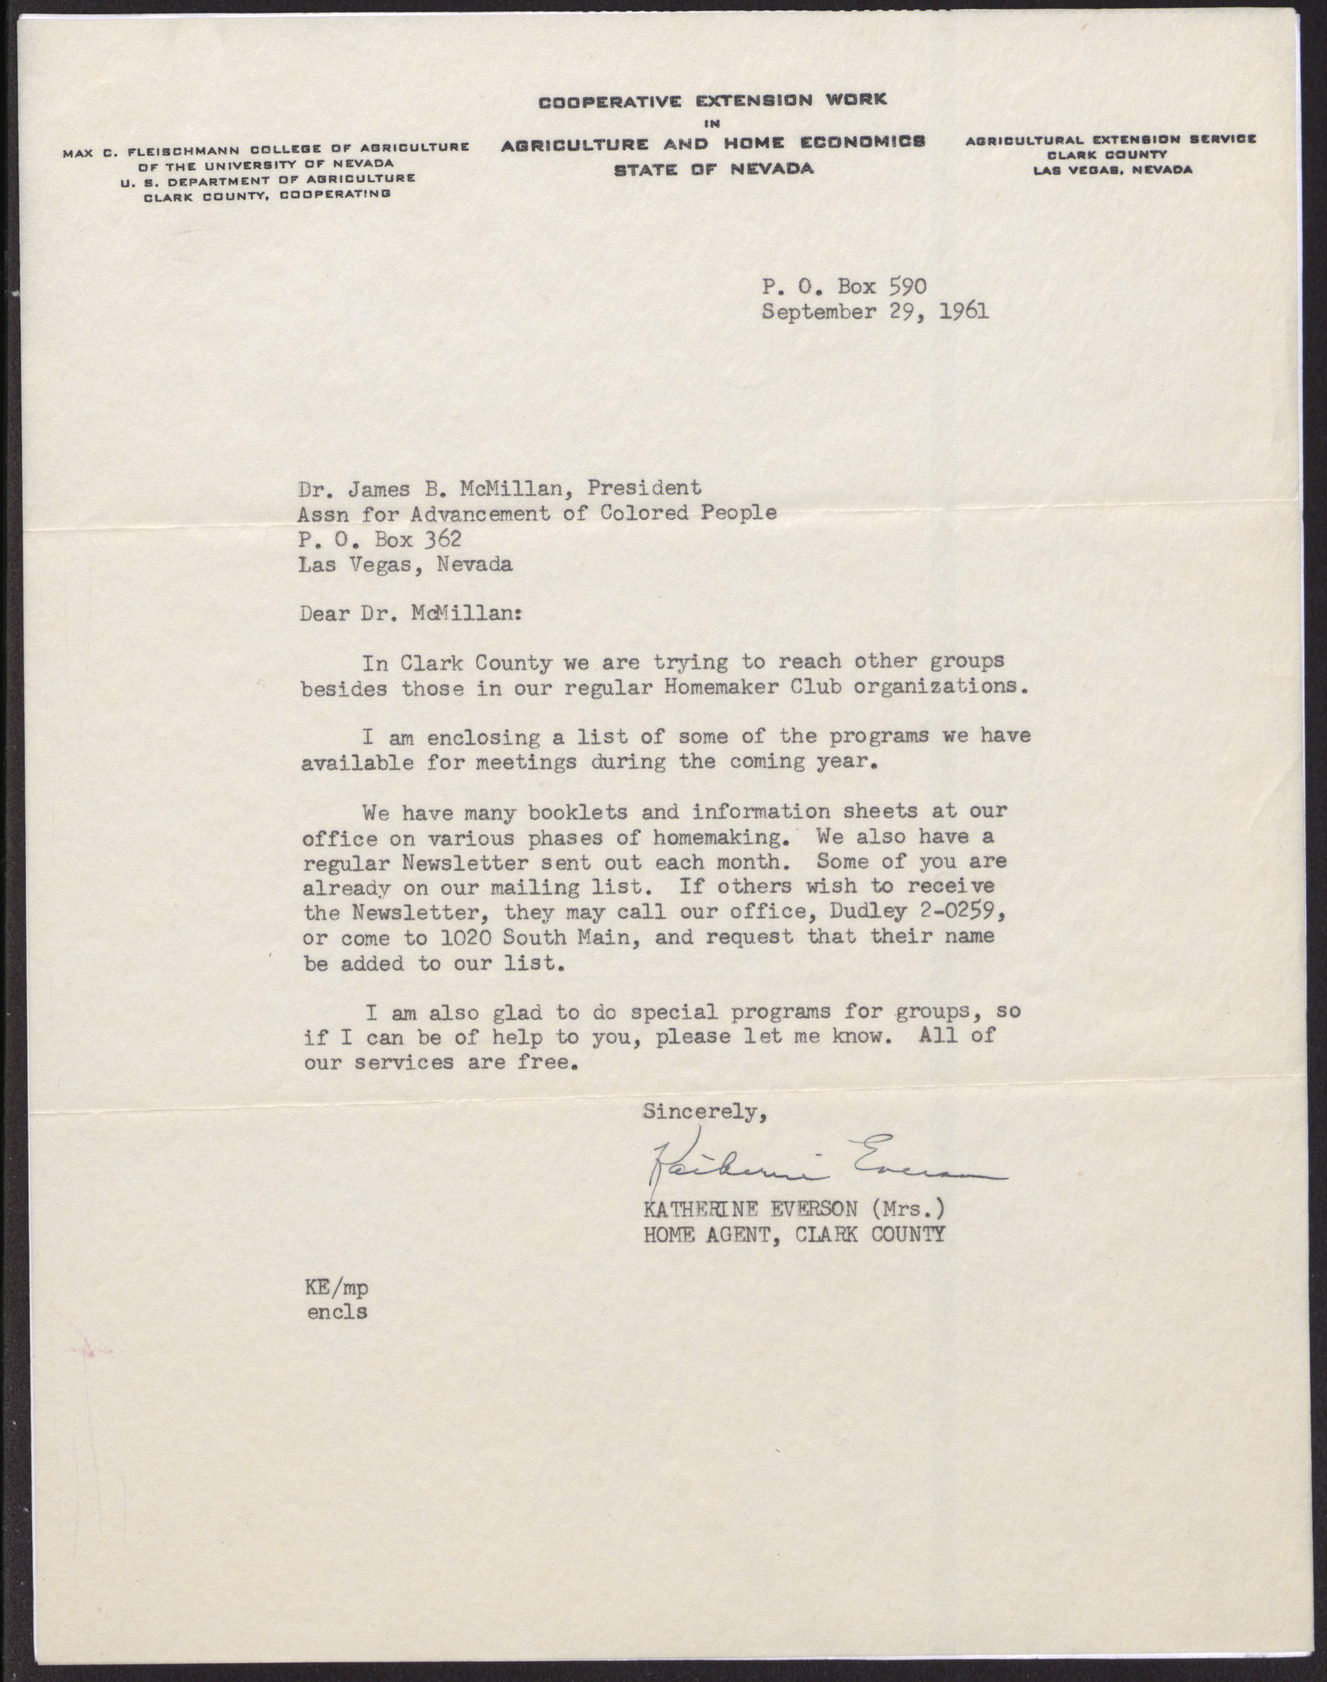 Letter to Dr. James B. McMillan from Katherine Everson, September 29, 1961